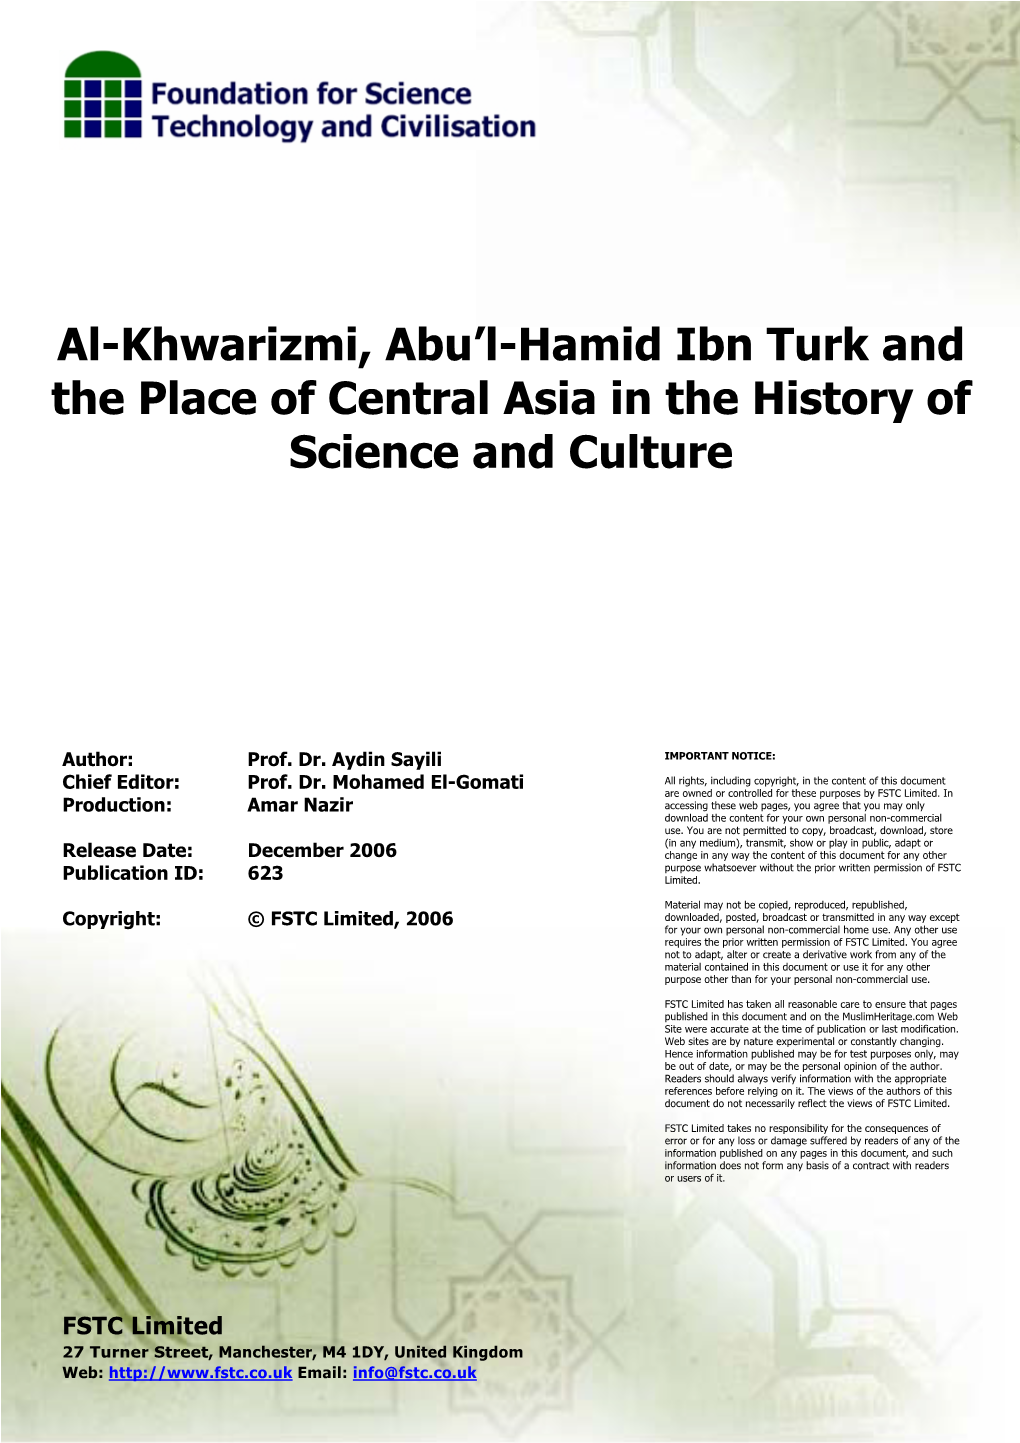 Al-Khwarizmi, Abu'l-Hamid Ibn Turk and the Place of Central Asia in The